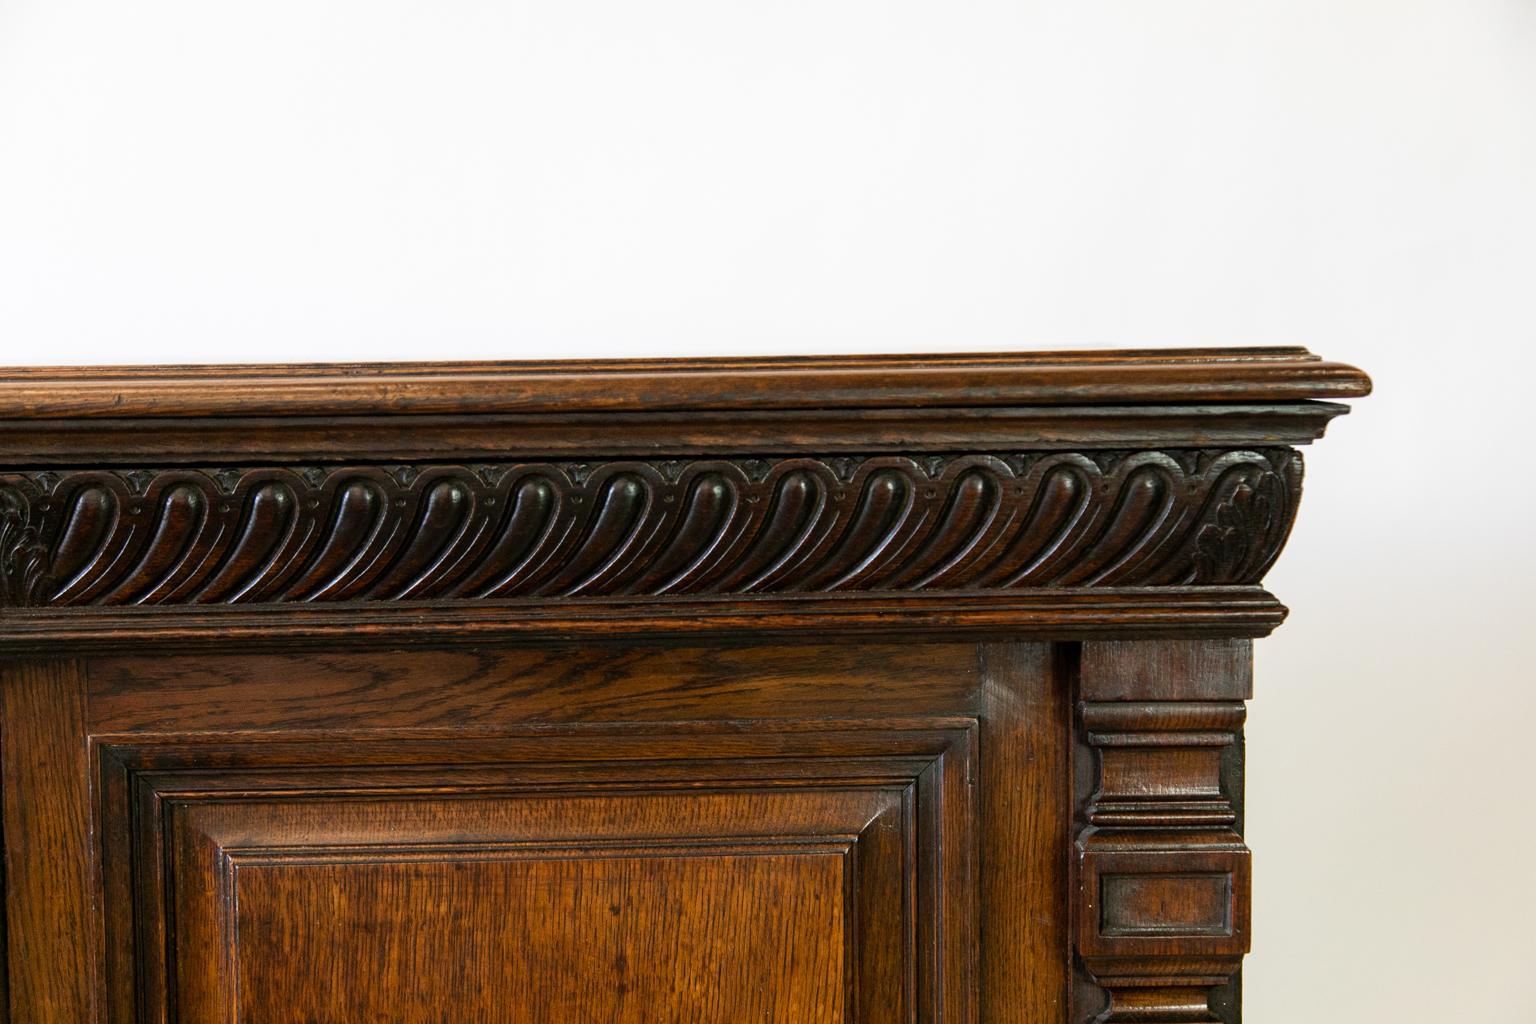 Carved English Oak Cabinet, with the top made from quarter sewn oak, and the frieze just below the top is two hidden drawers. The left hand compartment has two pull out trays, and the right hand side has one shelf. The stiles are carved pilasters